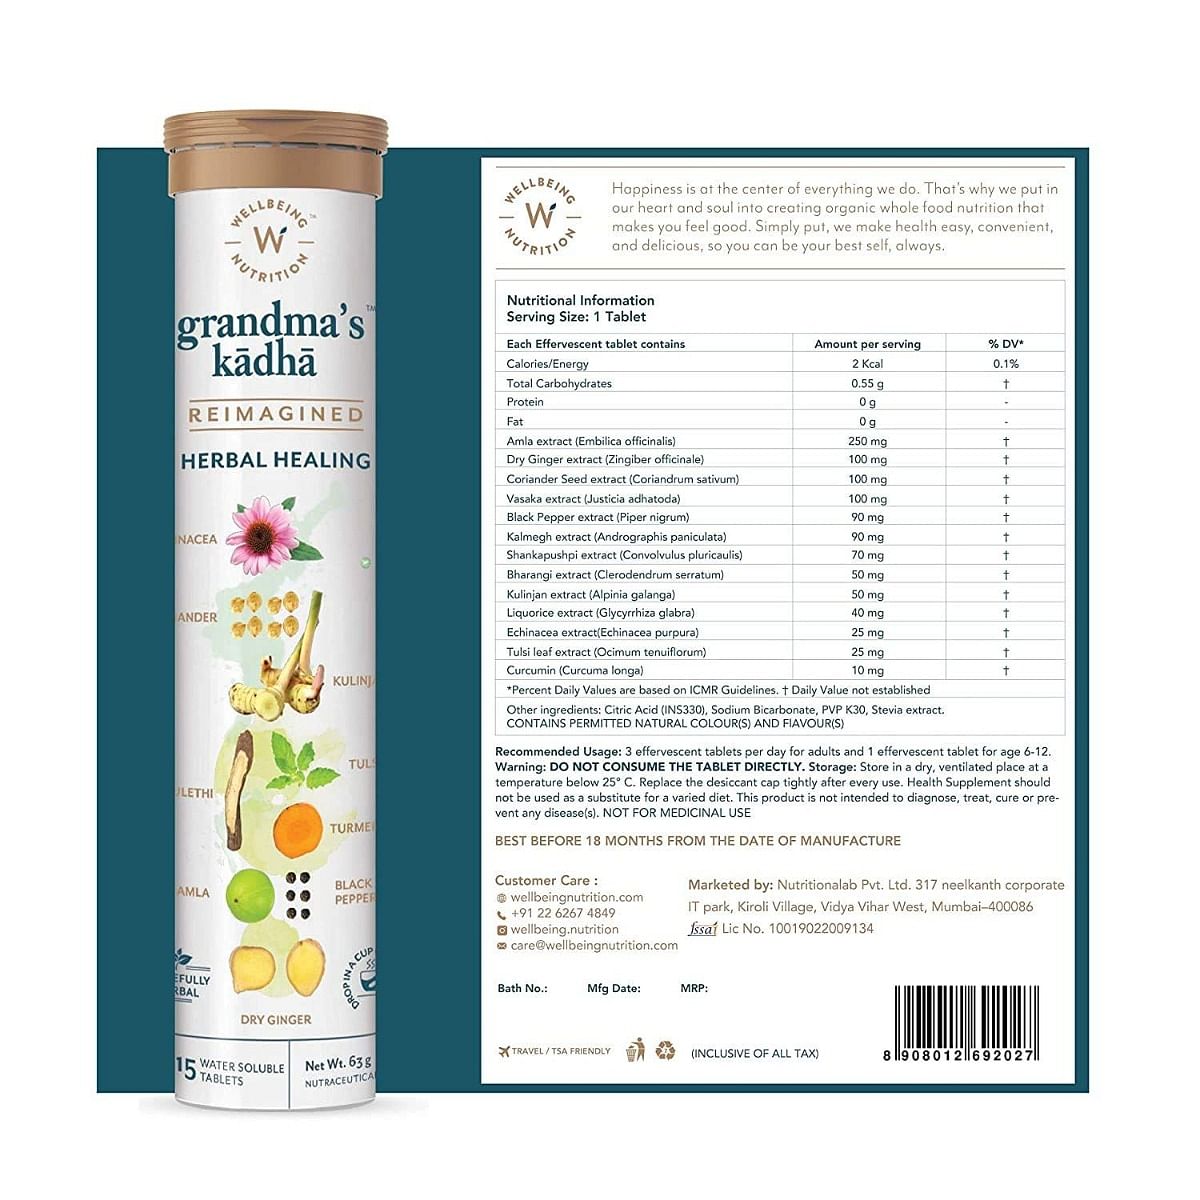 Wellbeing Nutrition Grandma's Kadha - Ayurvedic Immunity Booster for Cold, Cough, Sore Throat, 15 Effervescent Tablets